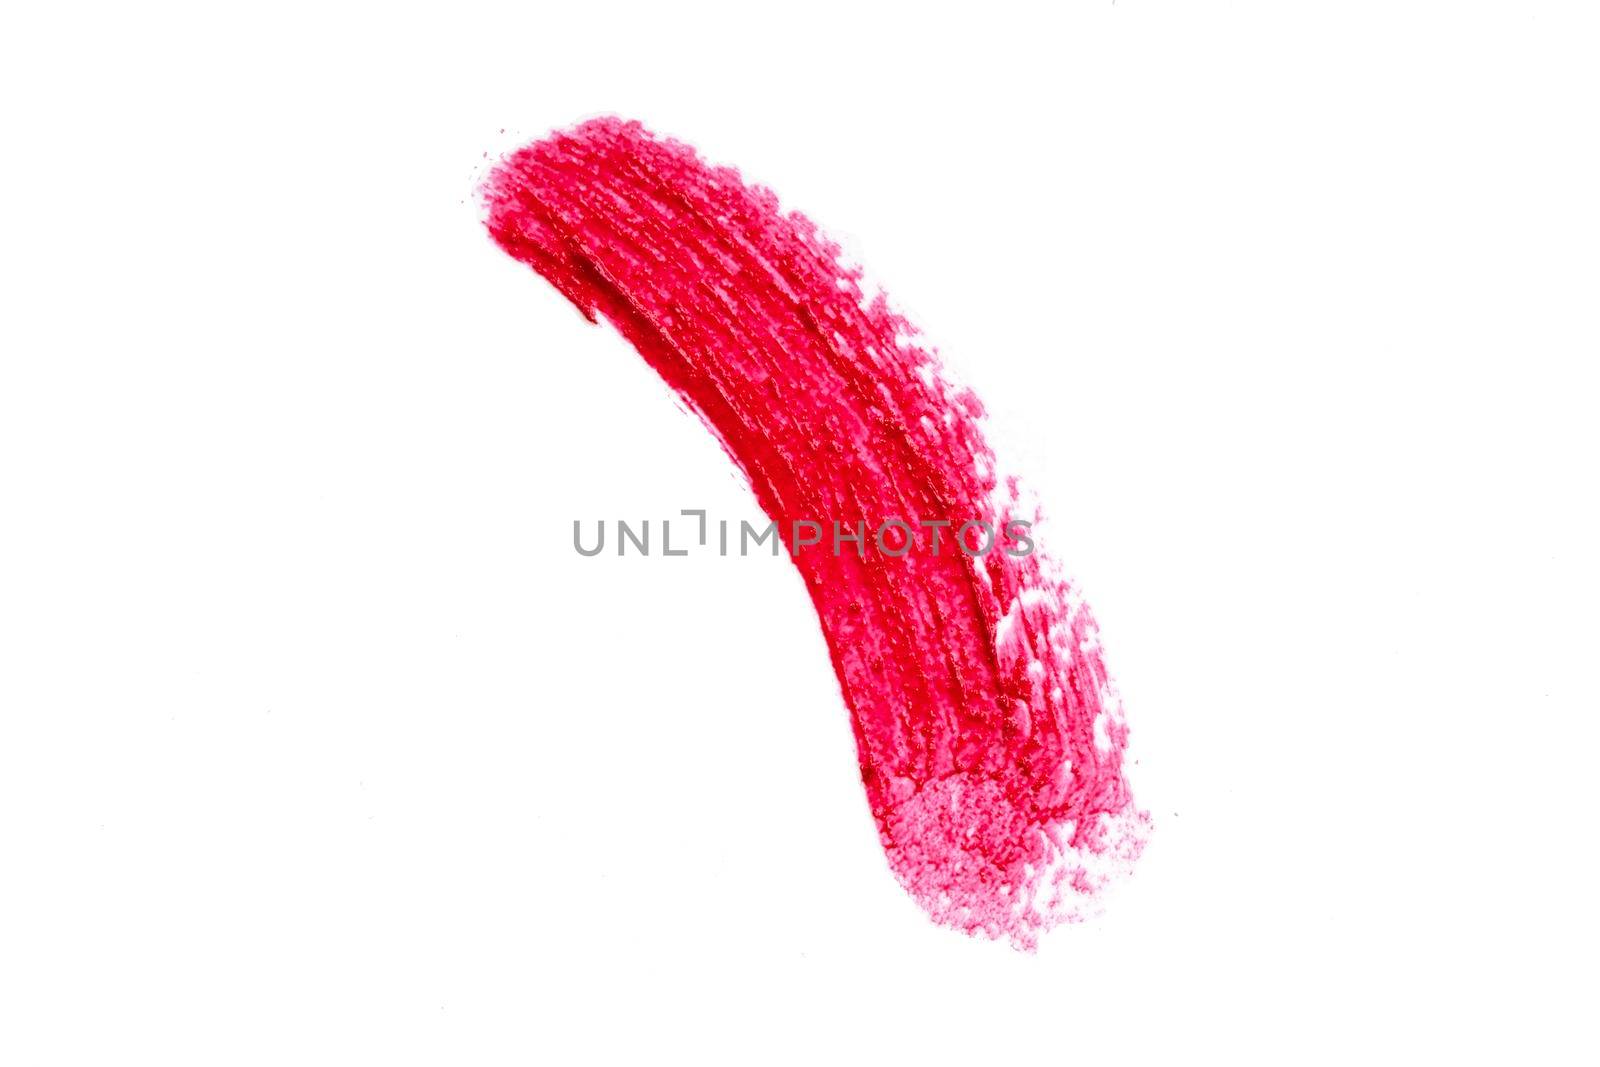 Lipstick smear smudge isolated on white. Makeup brush stroke cosmetic product. by photolime